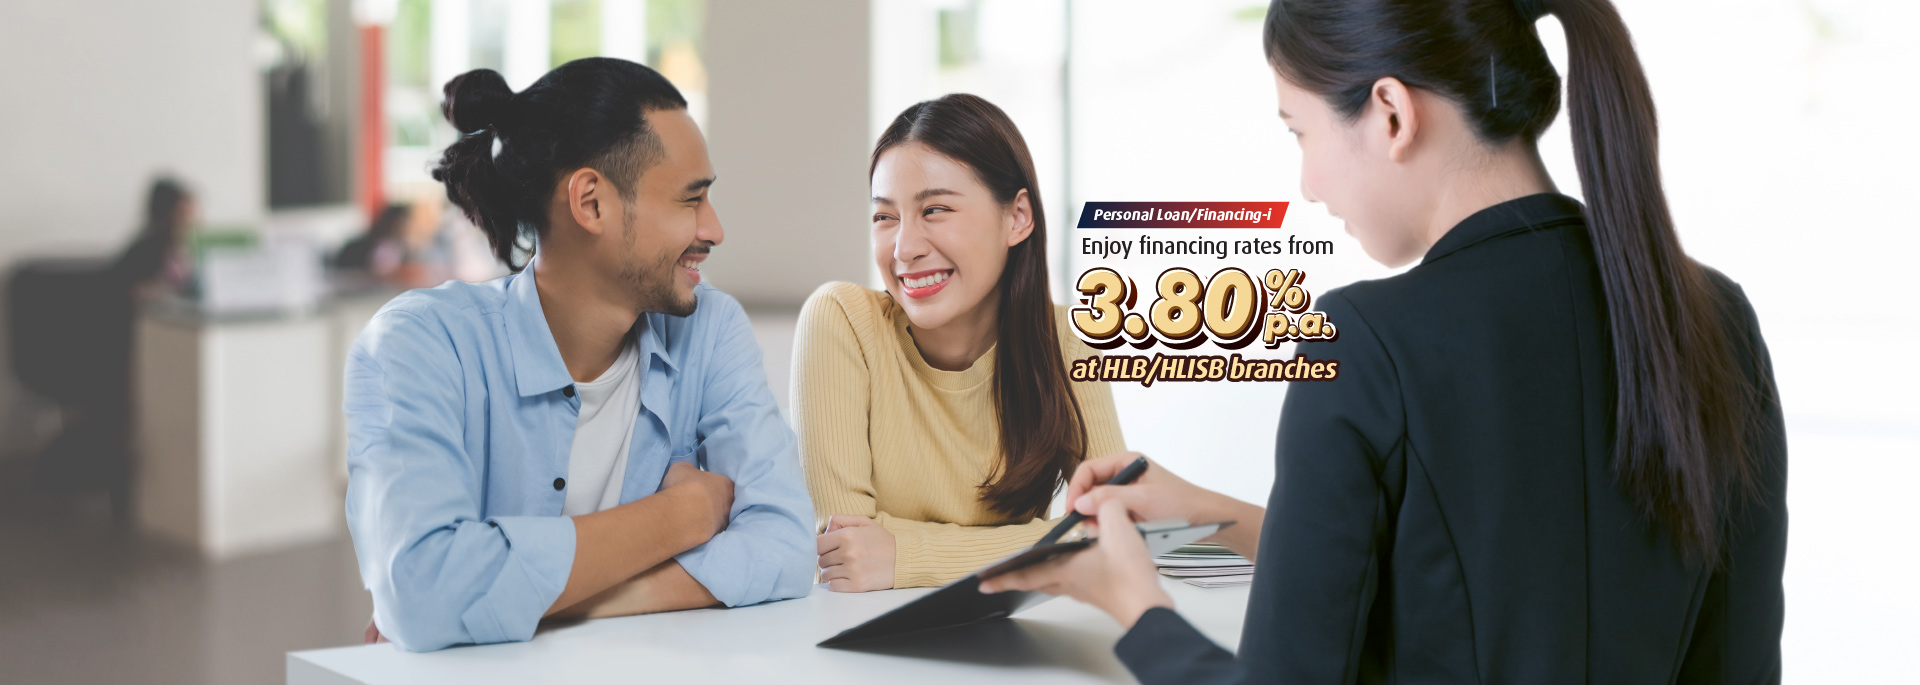 Enjoy financing rates from 3.80% p.a. at HLB/HLISB branches